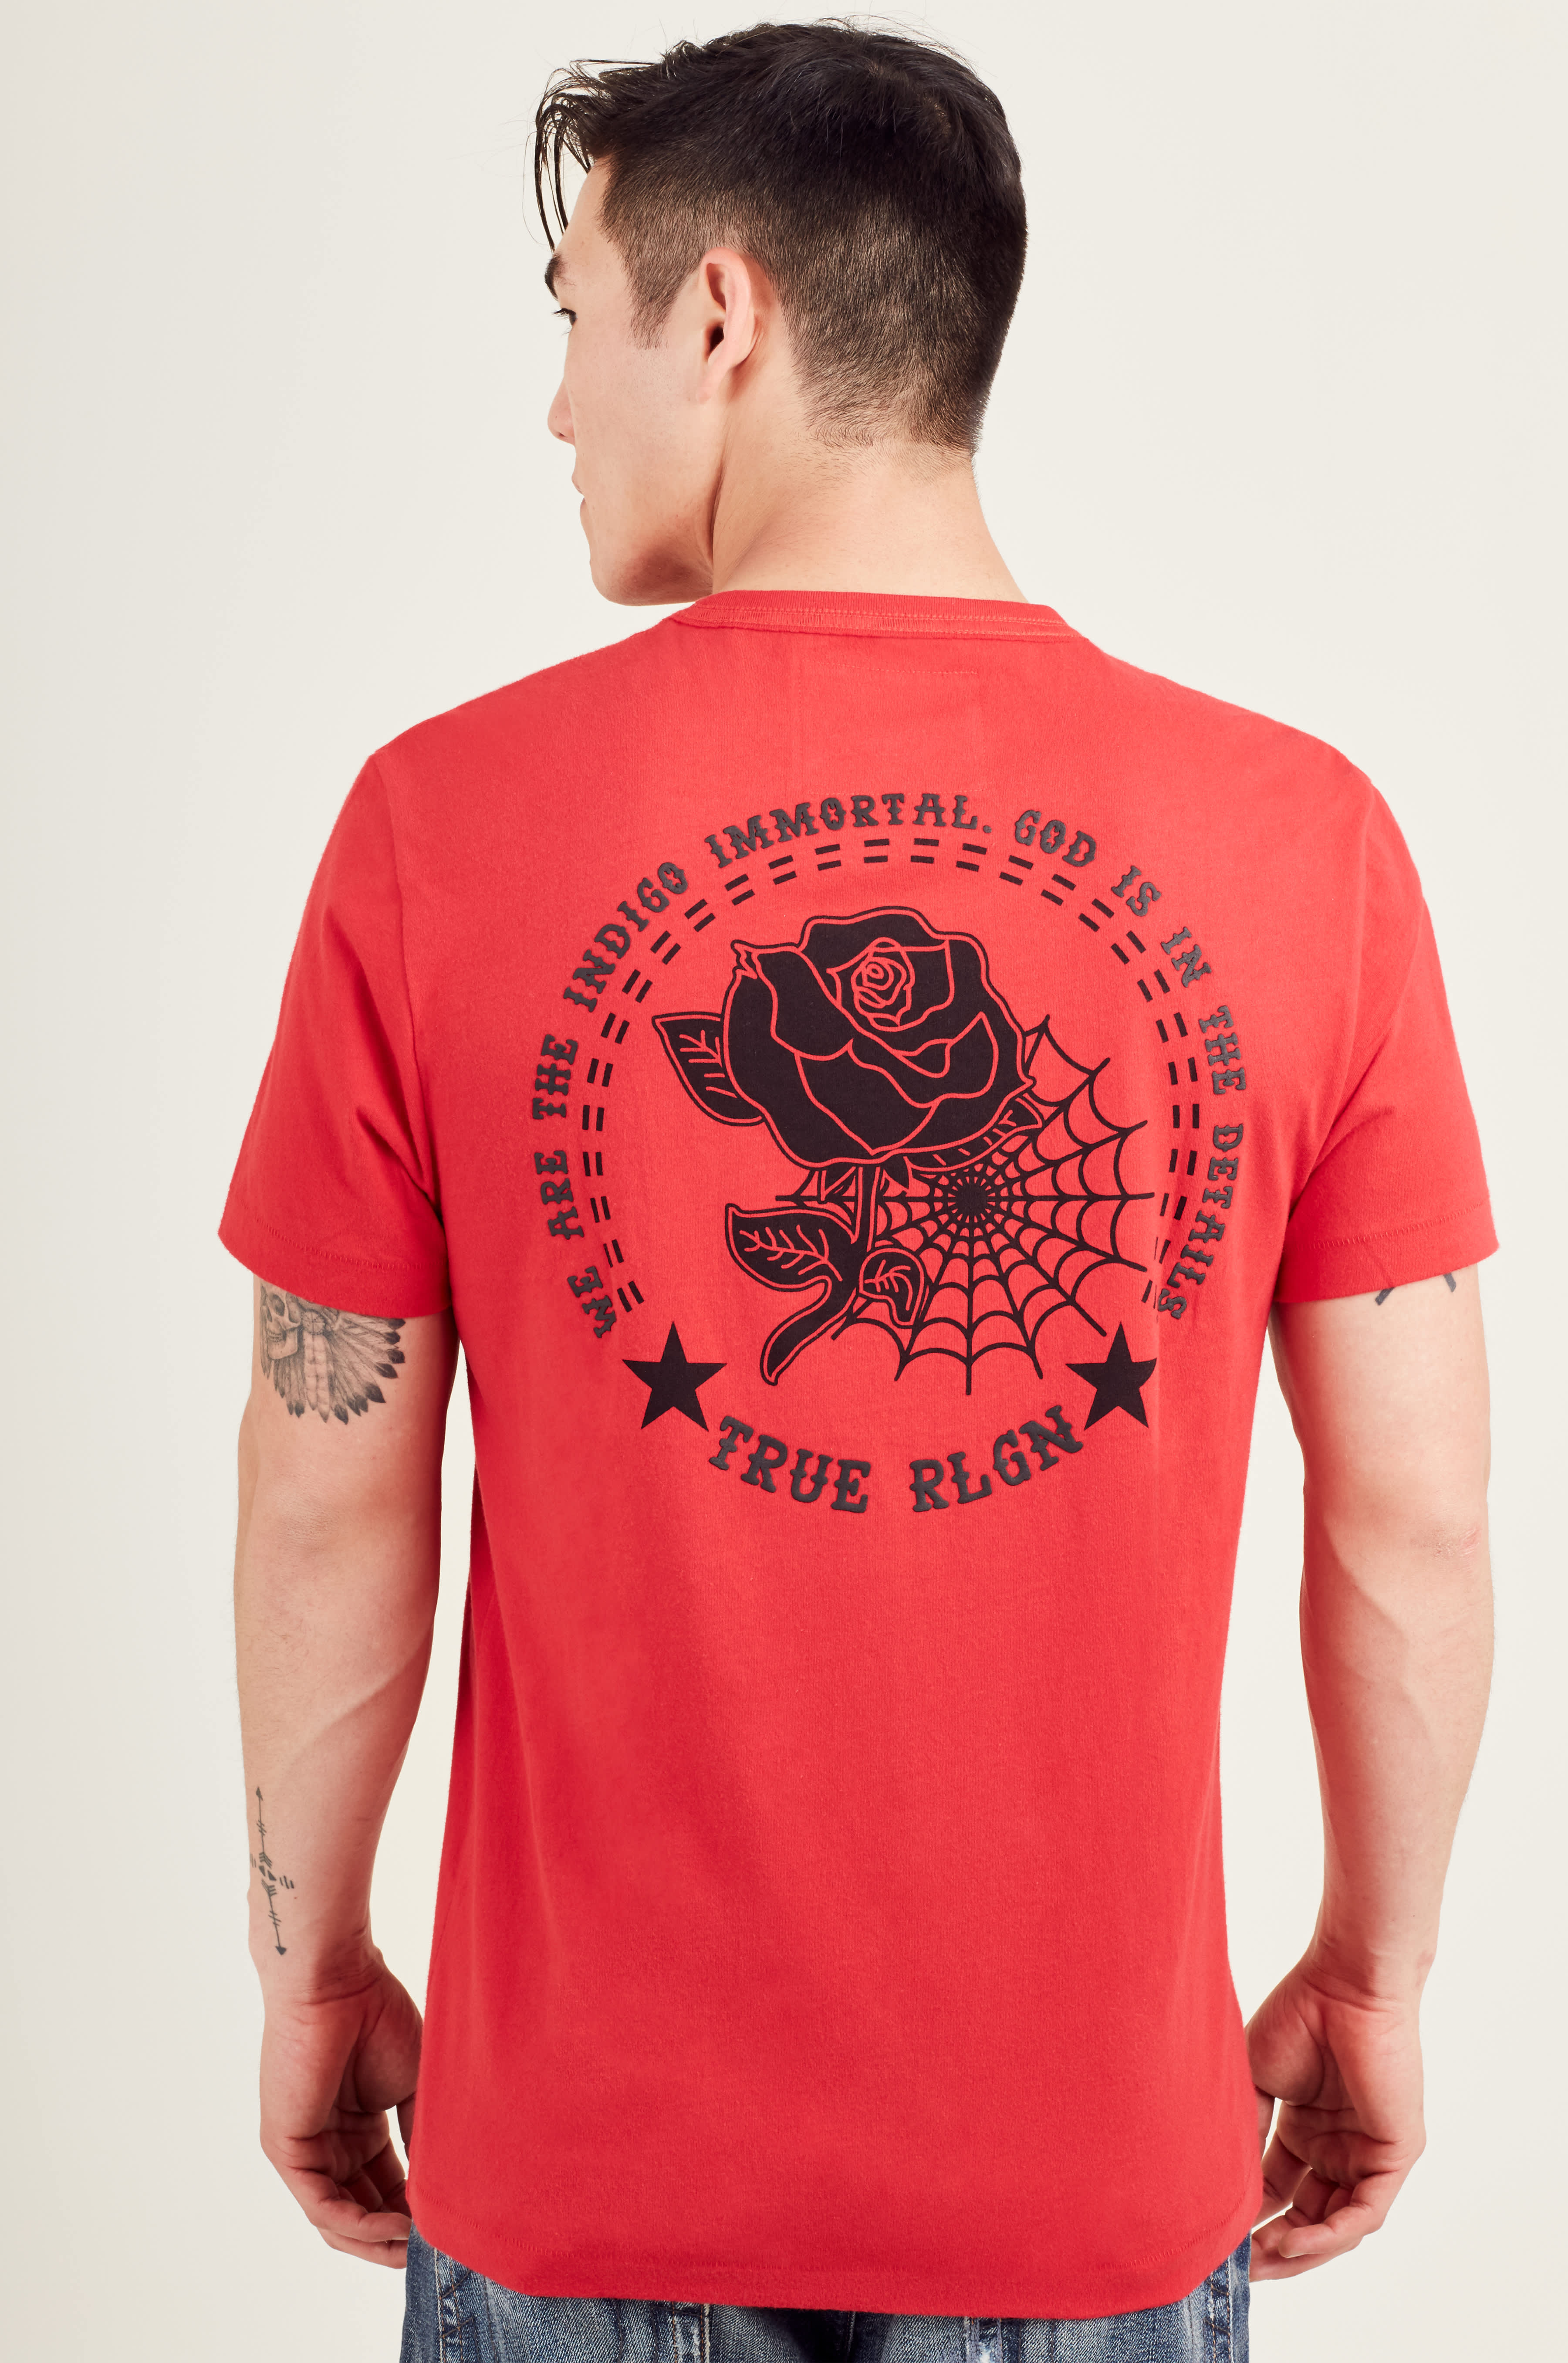 WEB AND ROSE MENS TEE